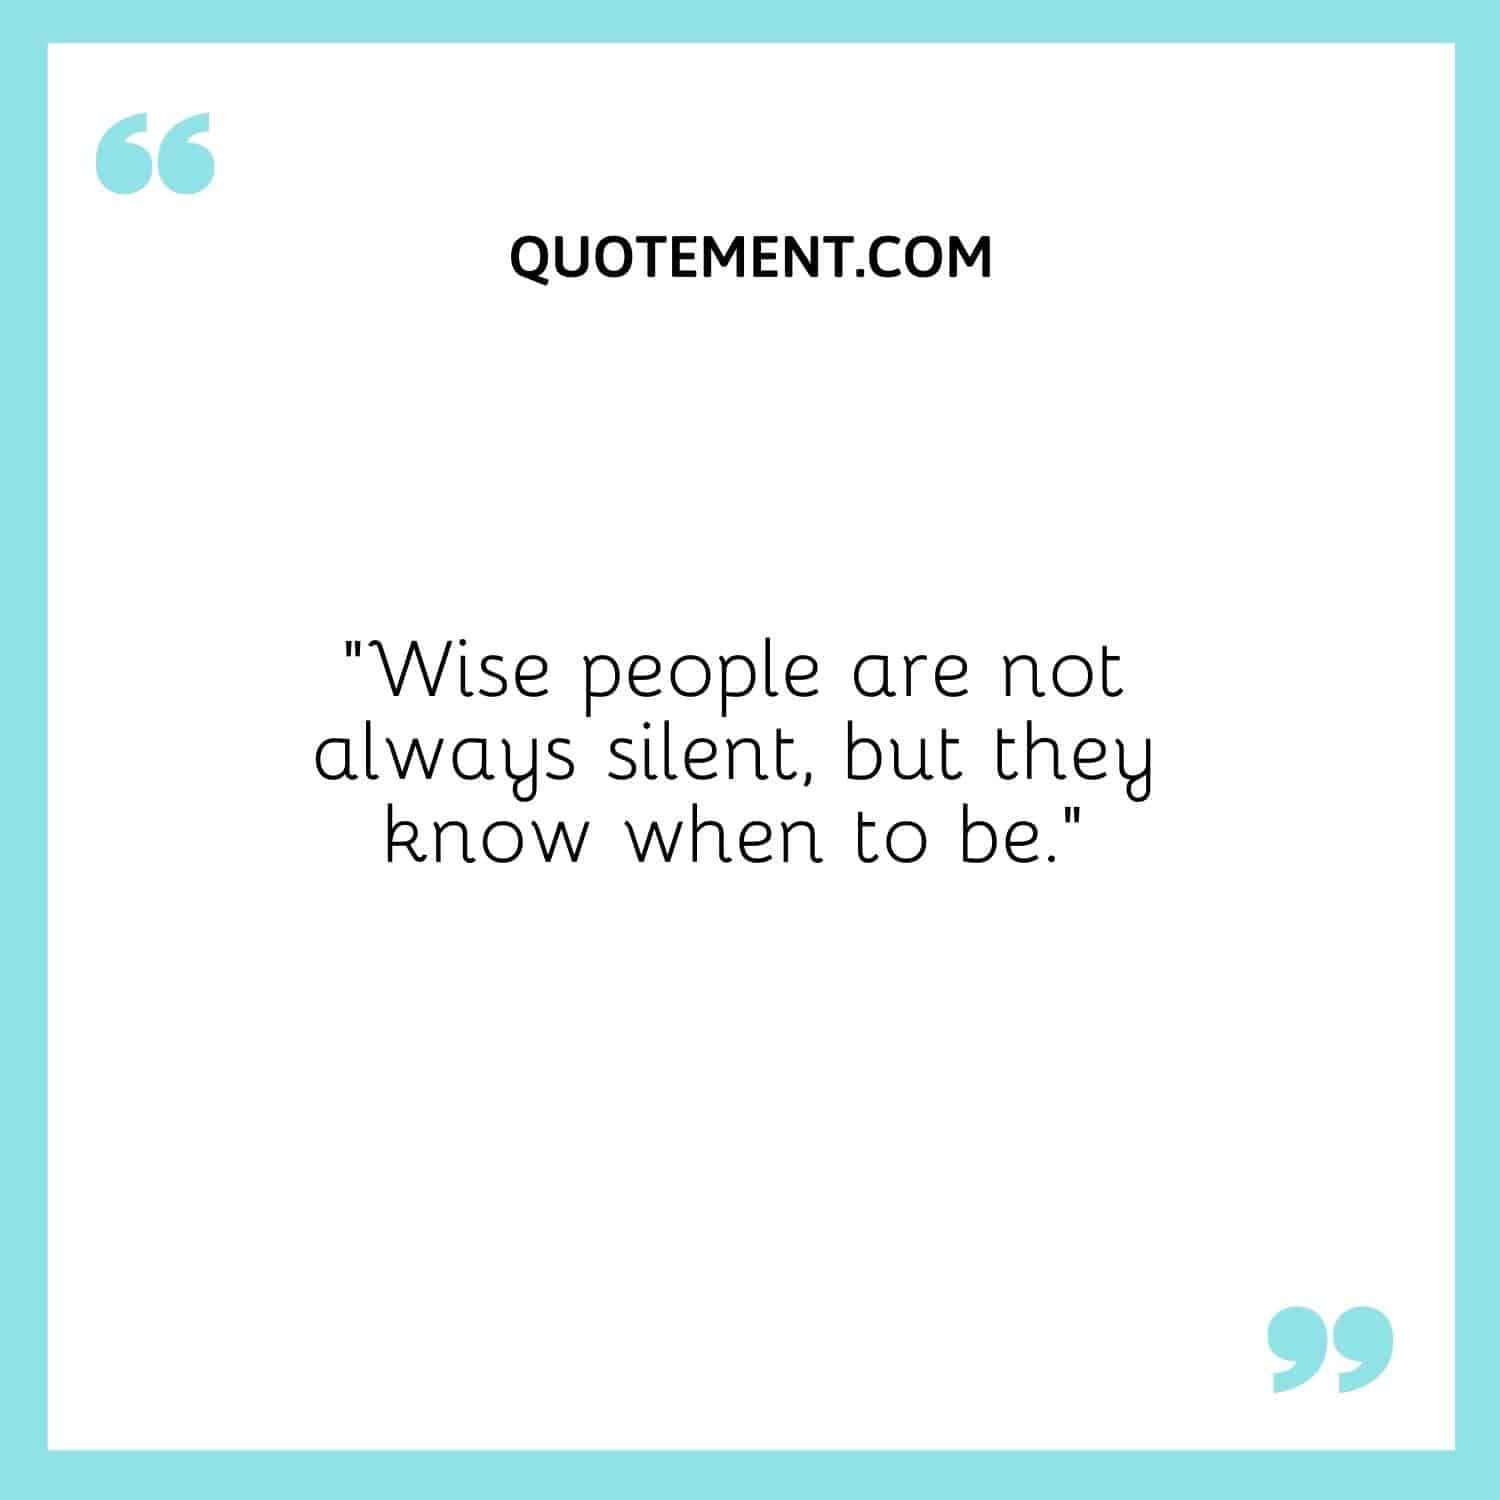 “Wise people are not always silent, but they know when to be.”